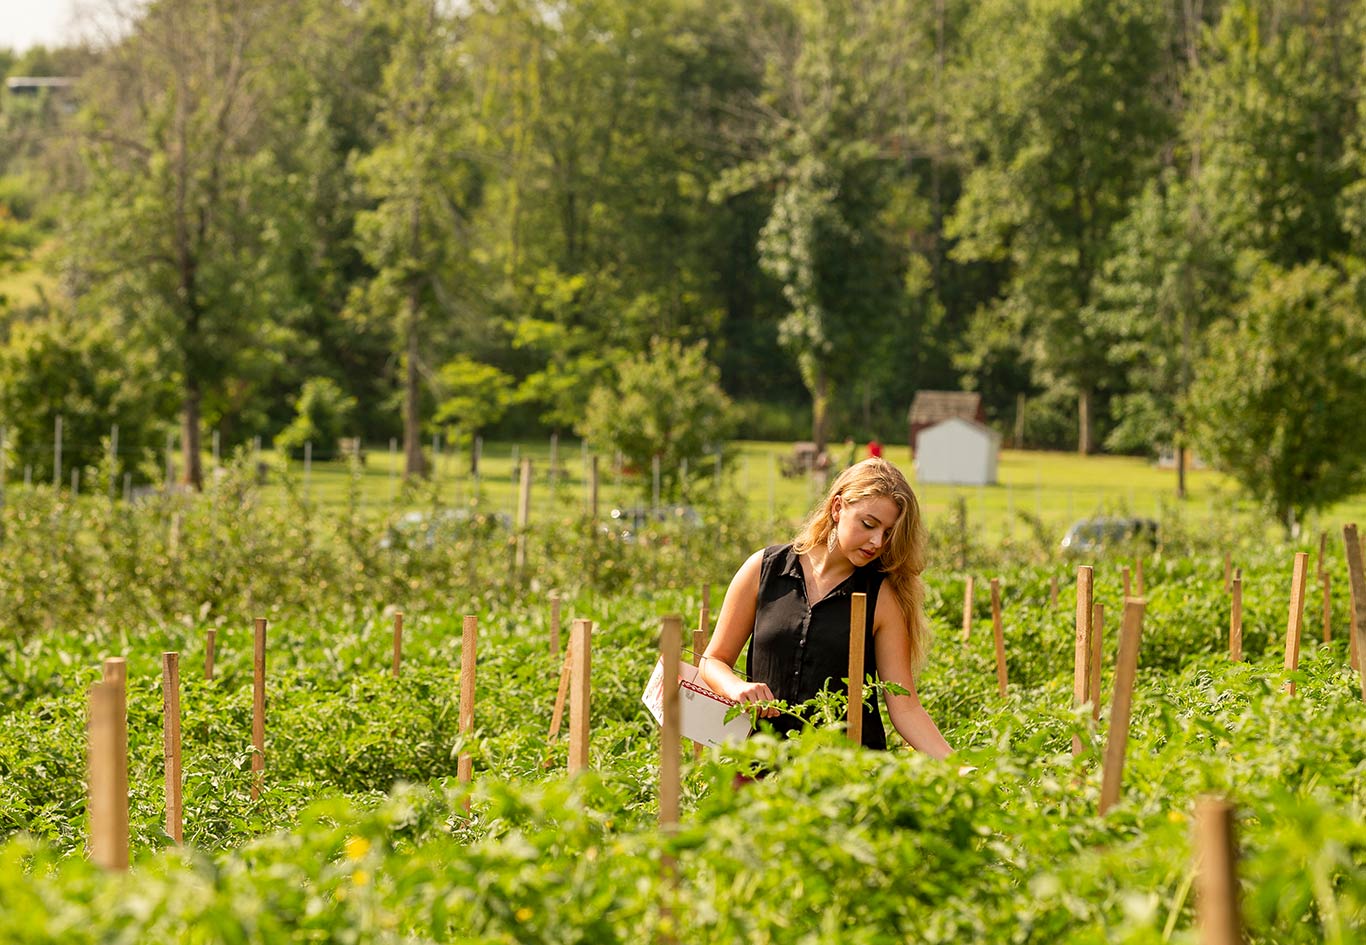 Woman picking her own produce in Ulster County, NY